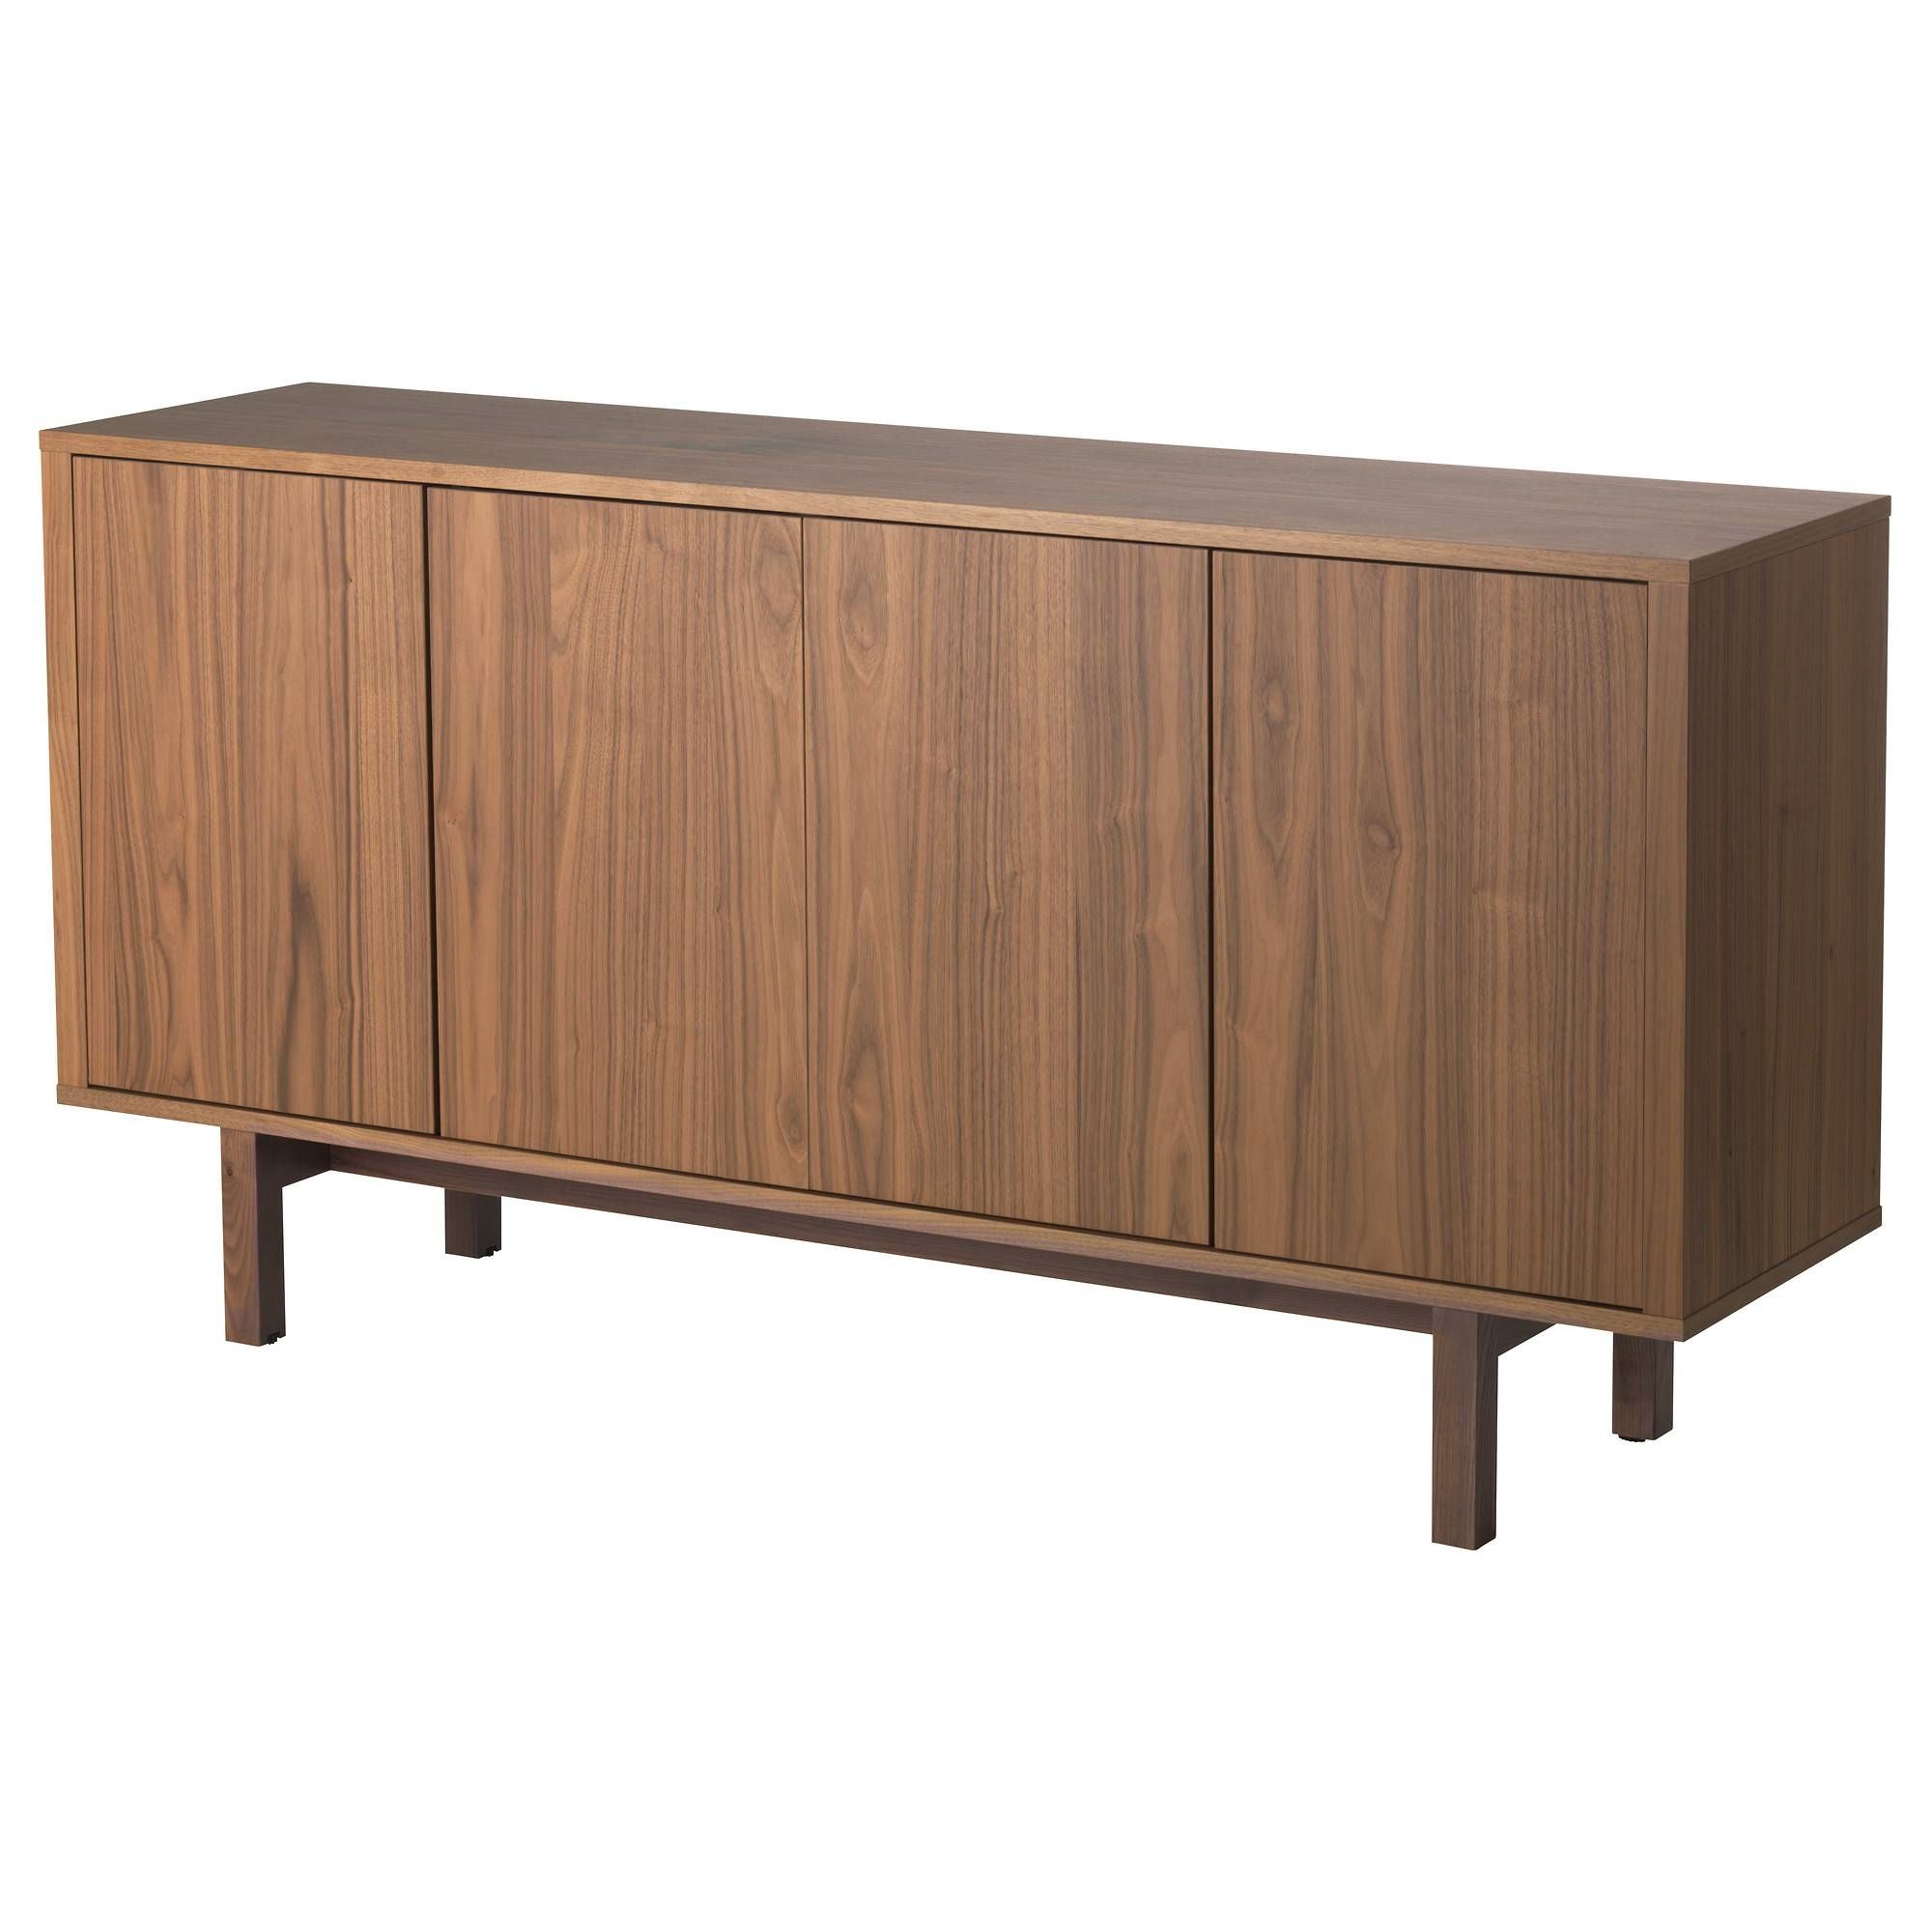 Buffet Tables & Sideboards – Ikea For Sideboards And Buffet Tables (View 15 of 15)